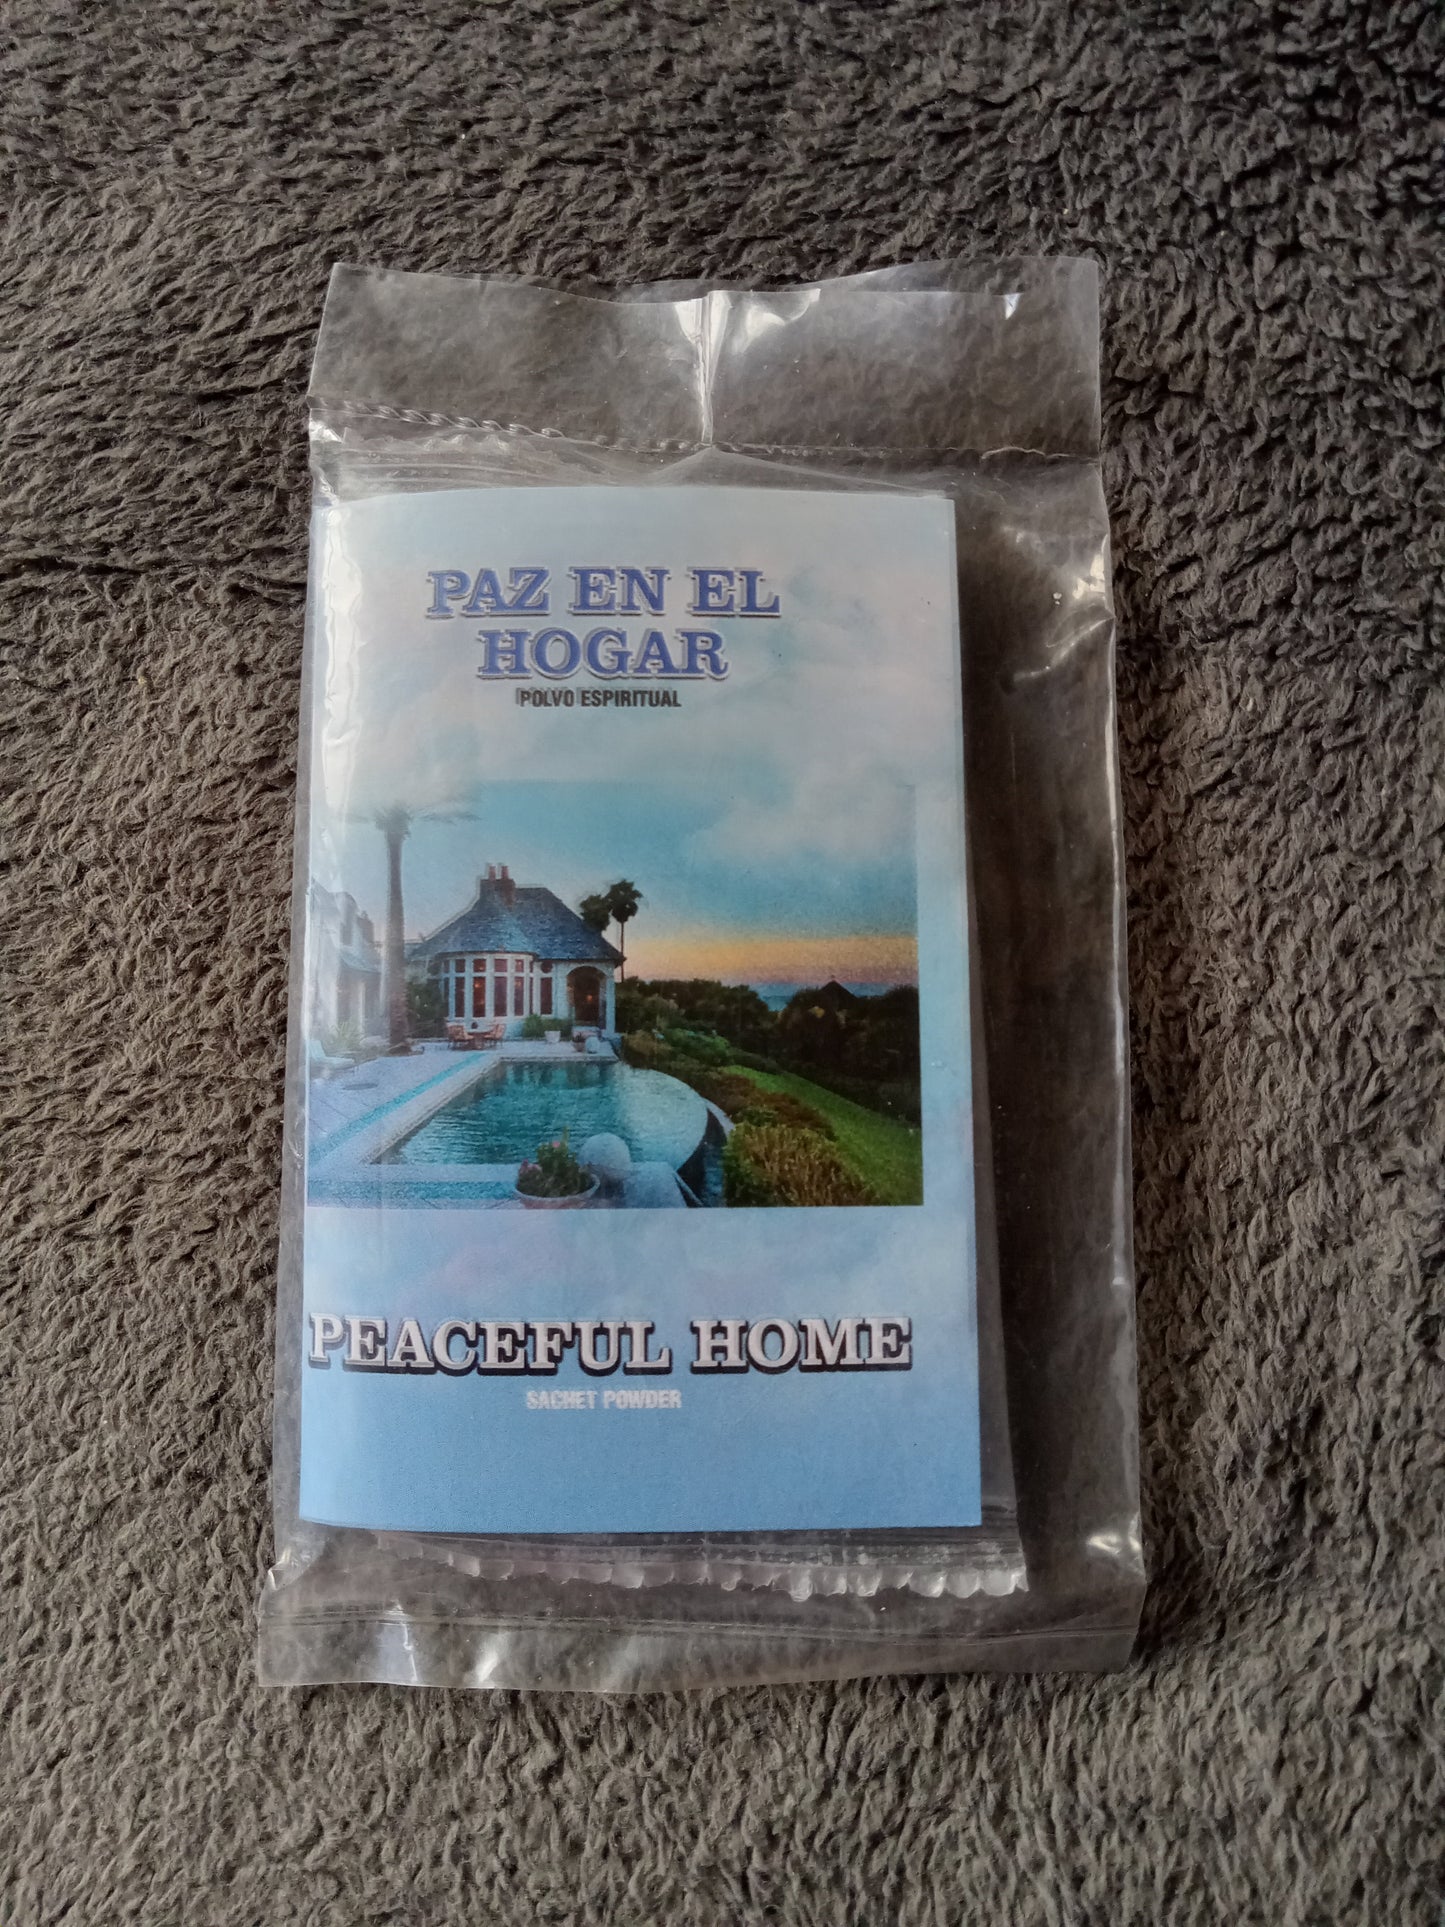  Peaceful Home Powder -  available at Amazing Creations Products . Grab yours for $3.99 today!